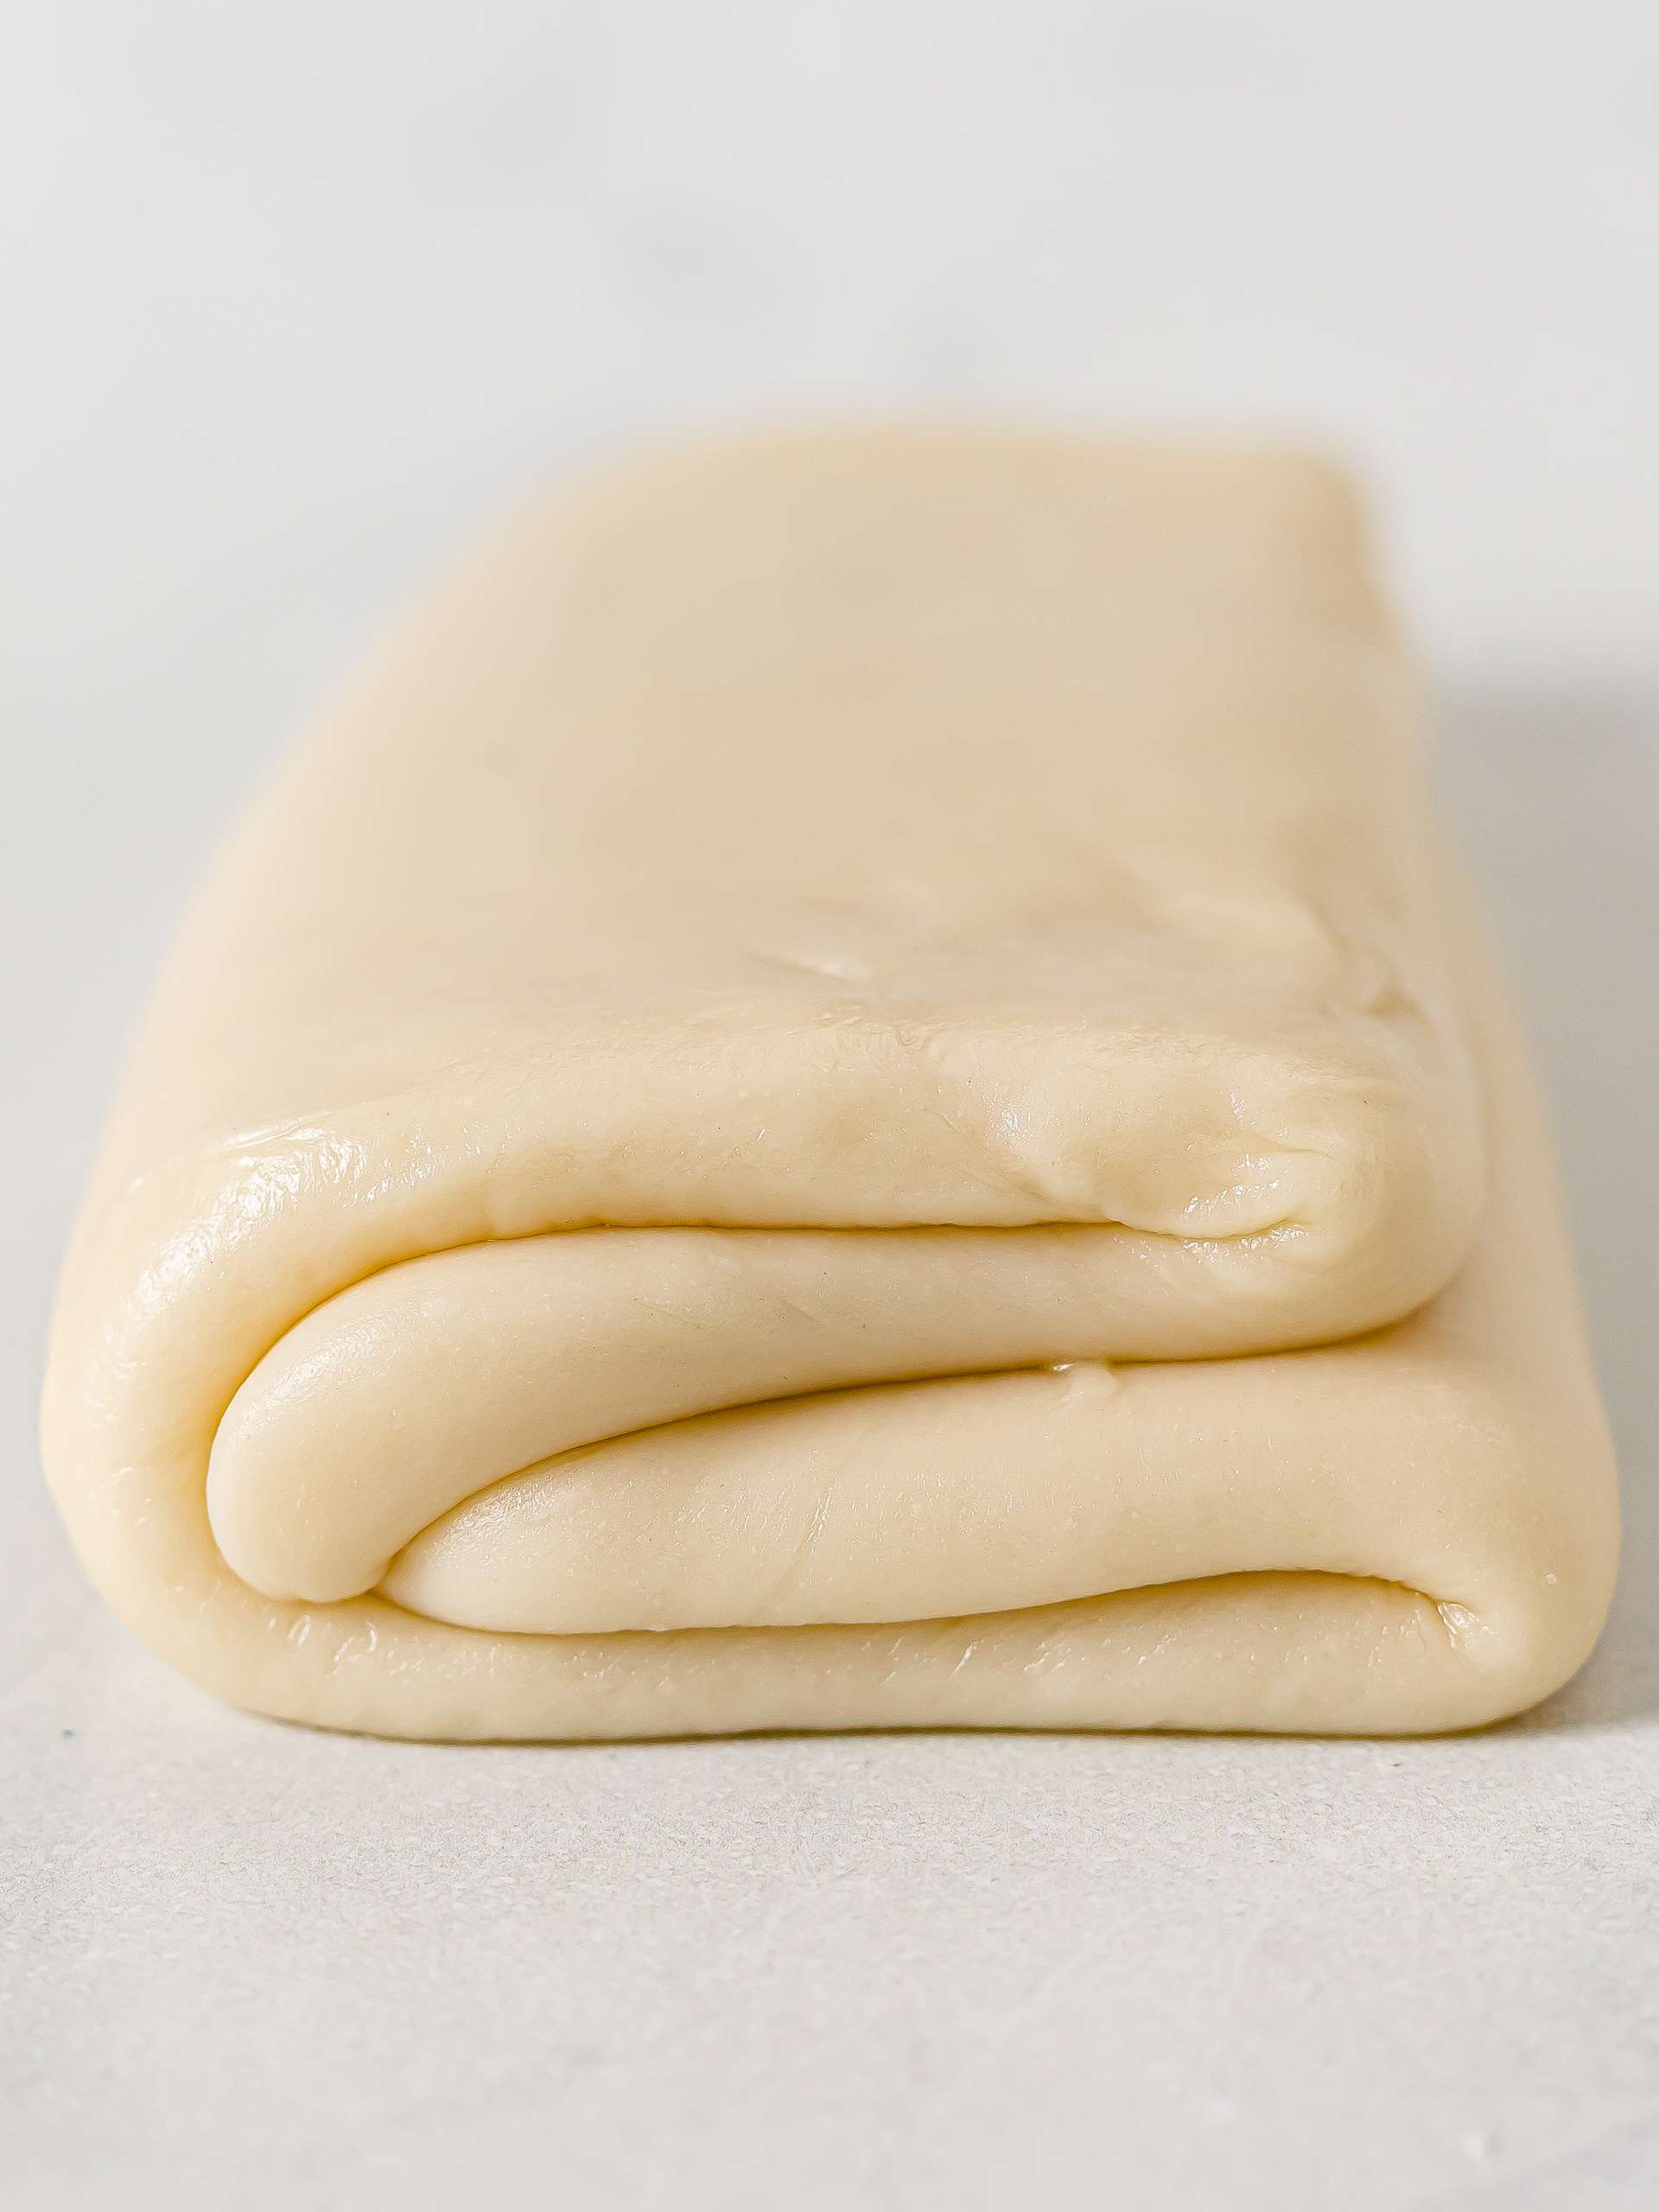 folded pastry dough for lamination